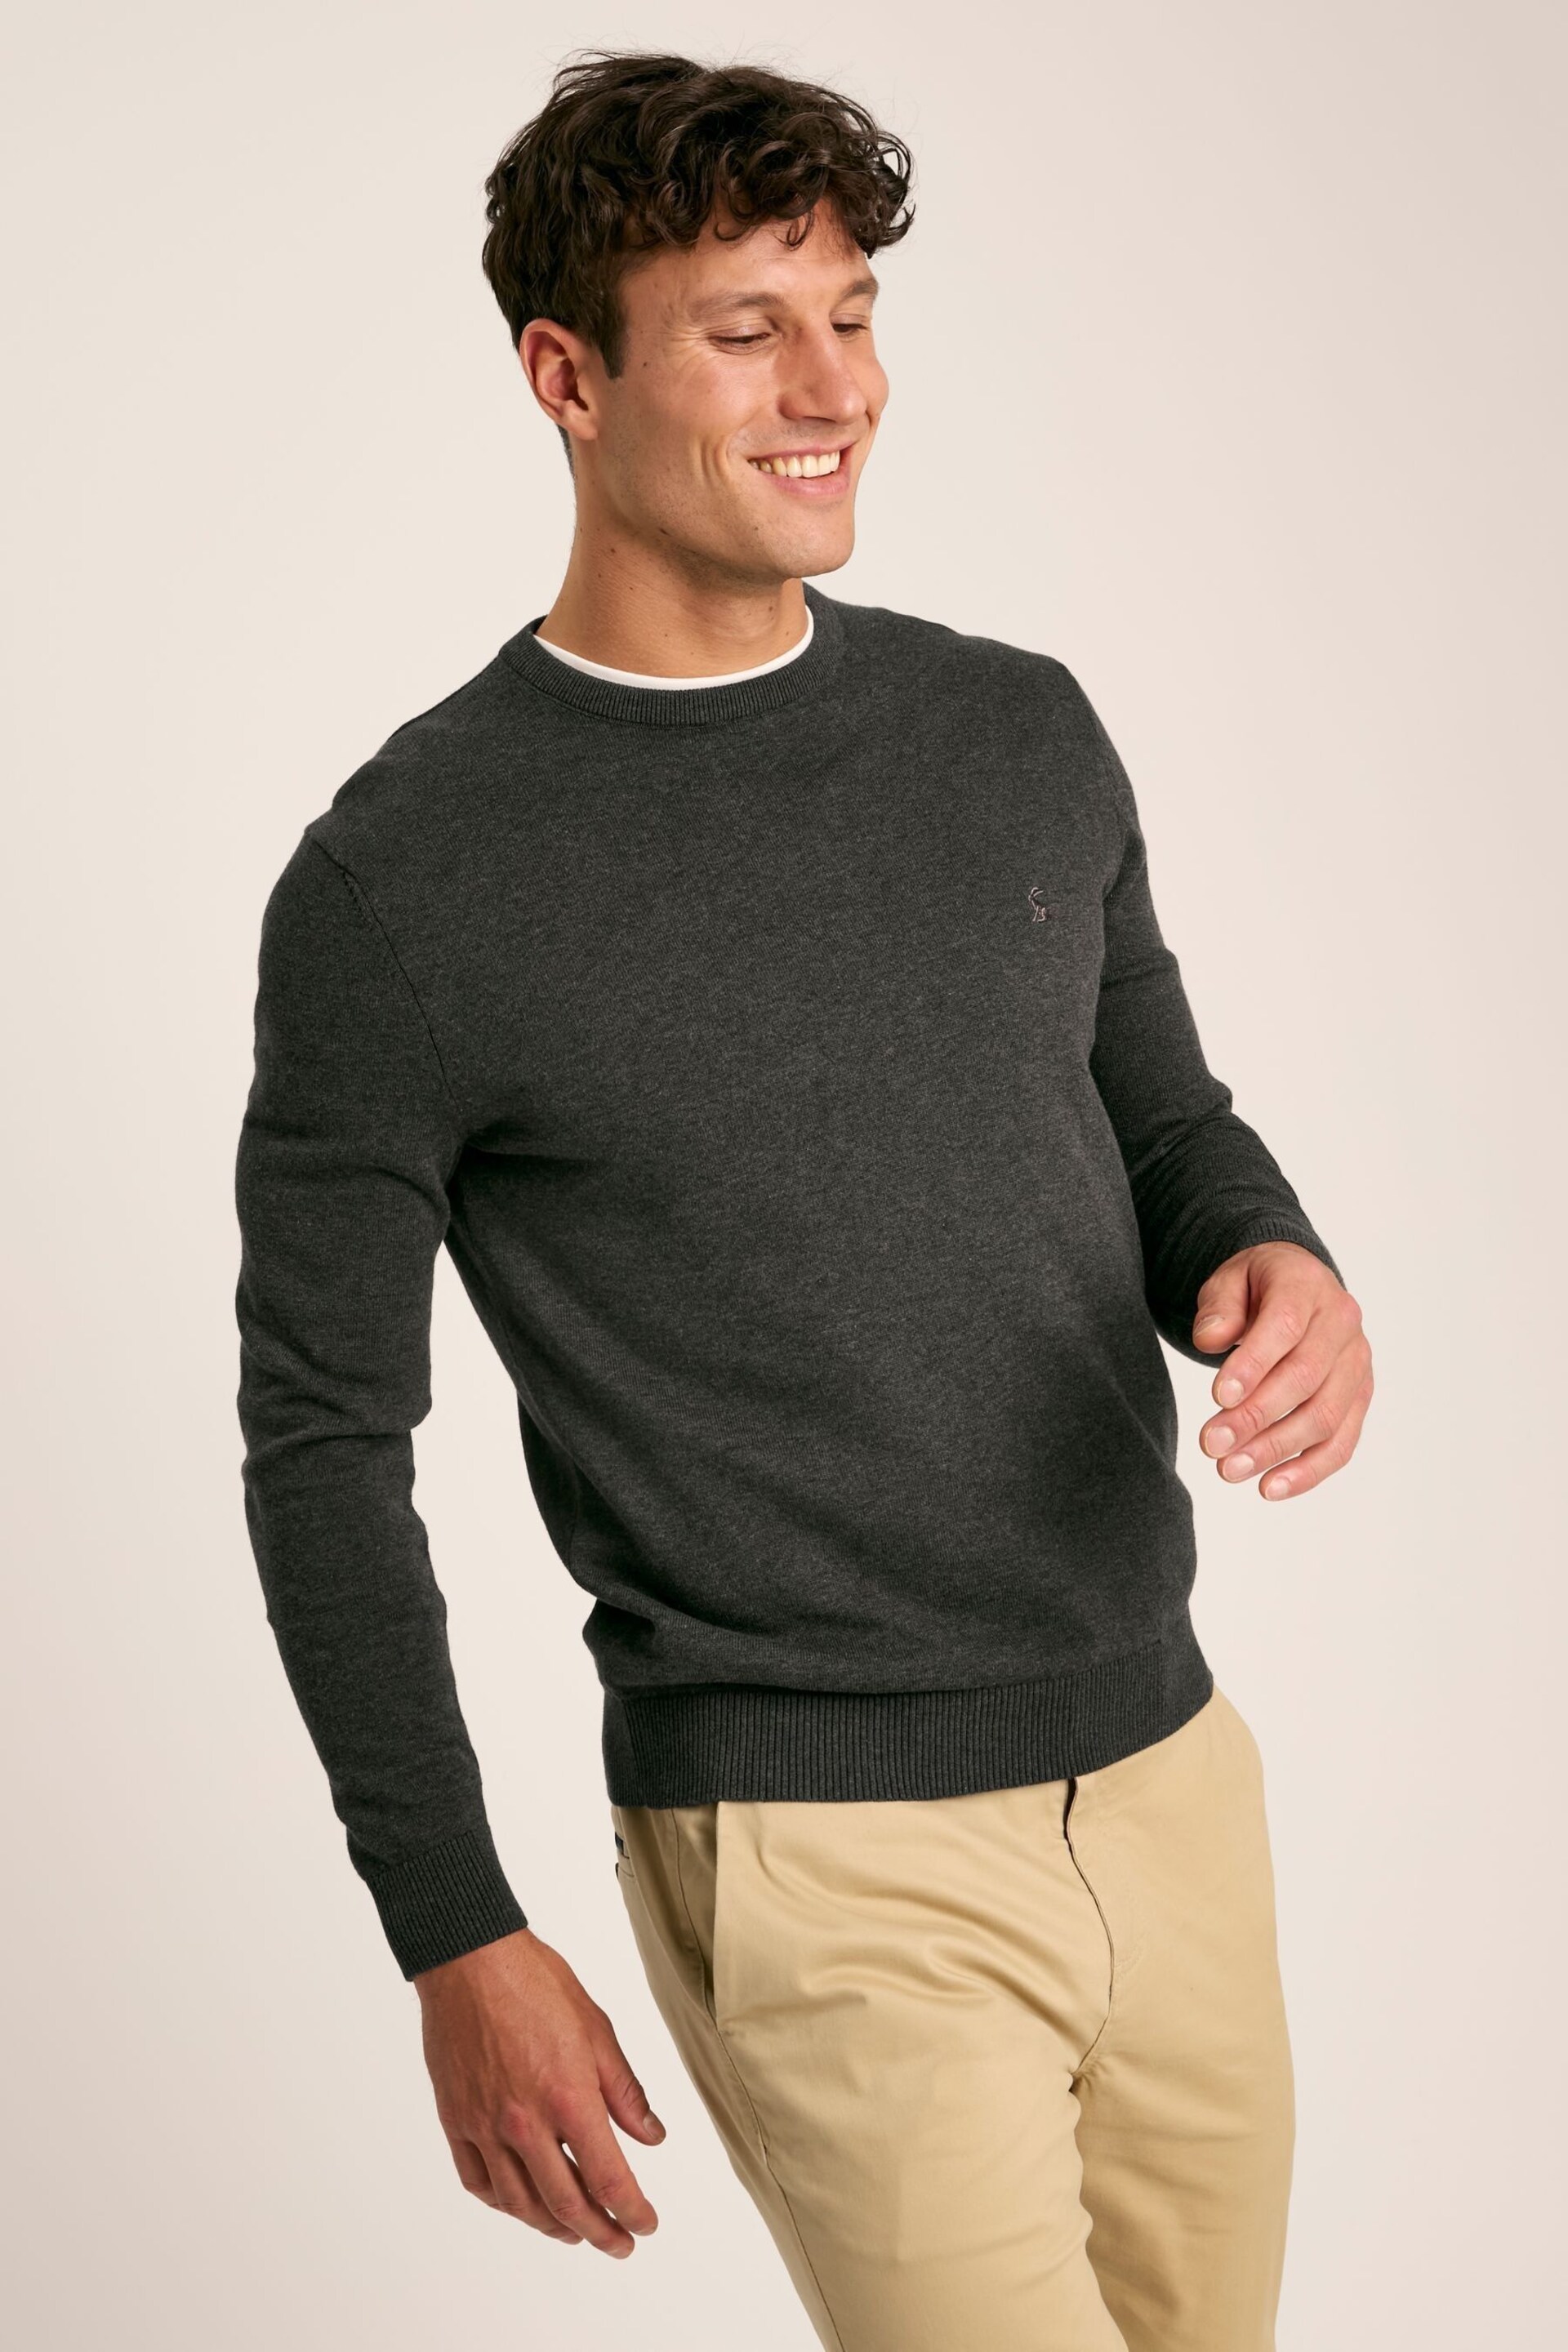 Joules Jarvis Grey Crew Neck Knitted Jumper - Image 3 of 7